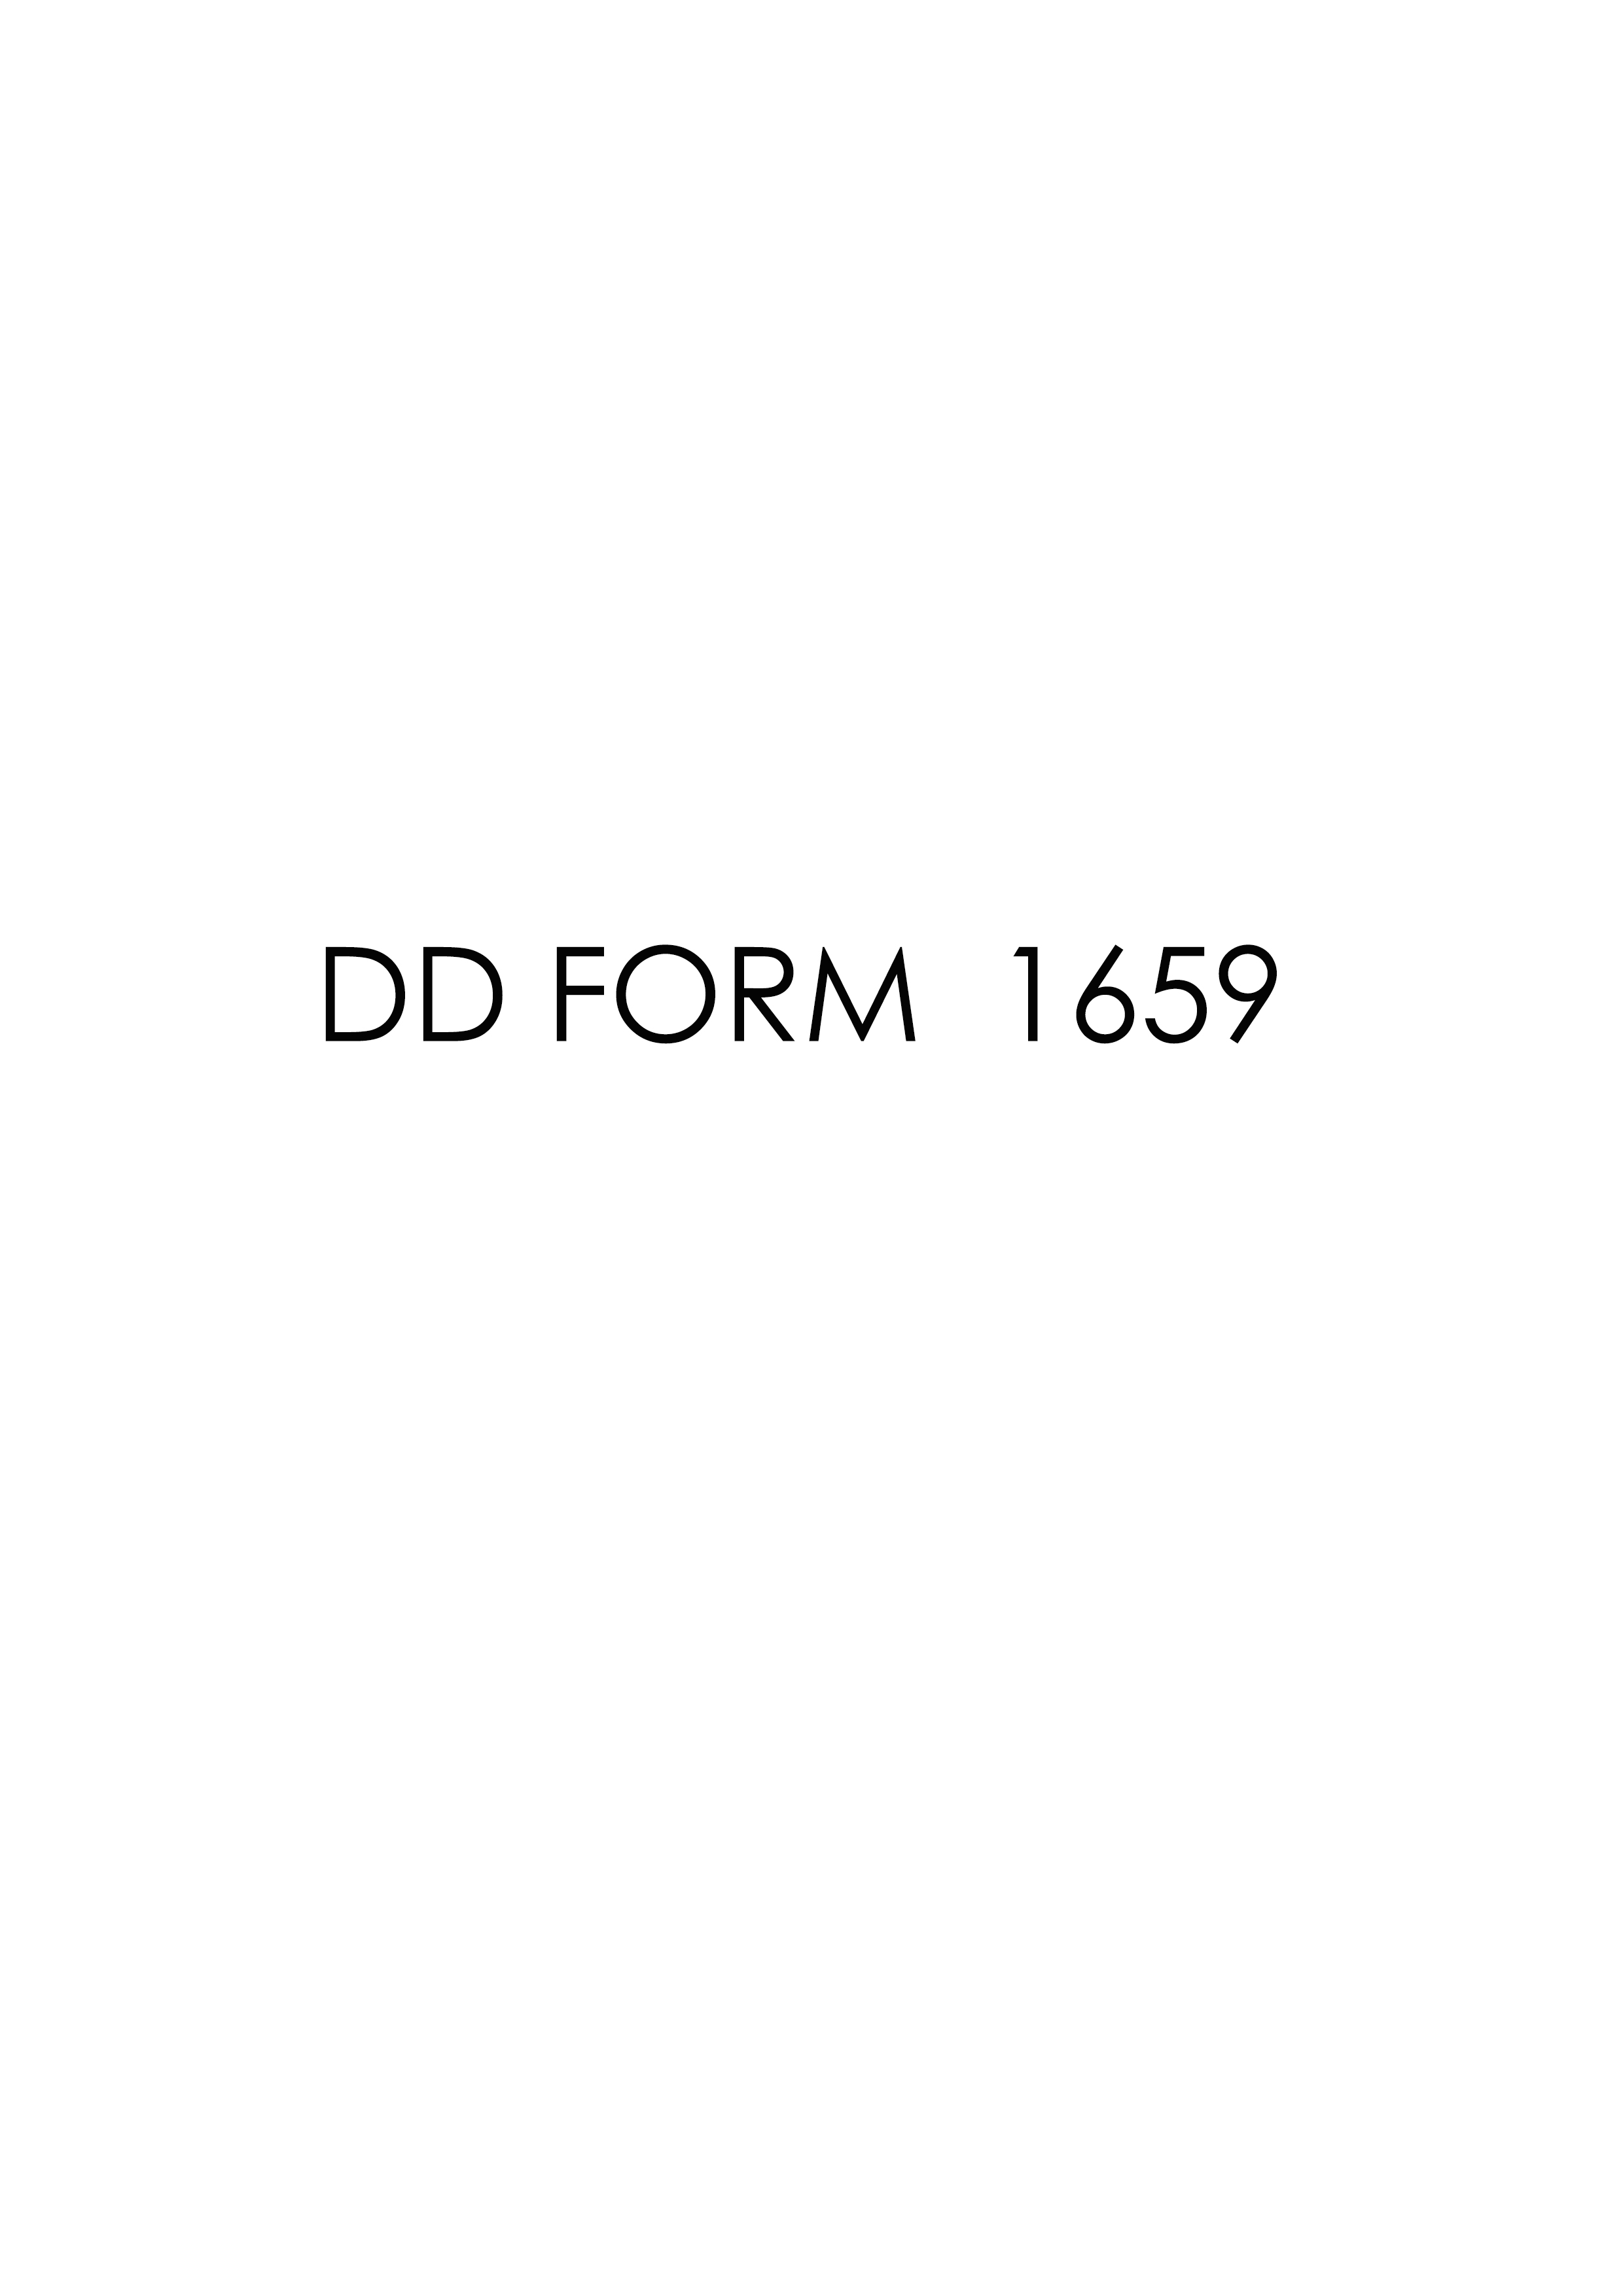 Download Fillable dd Form 1659